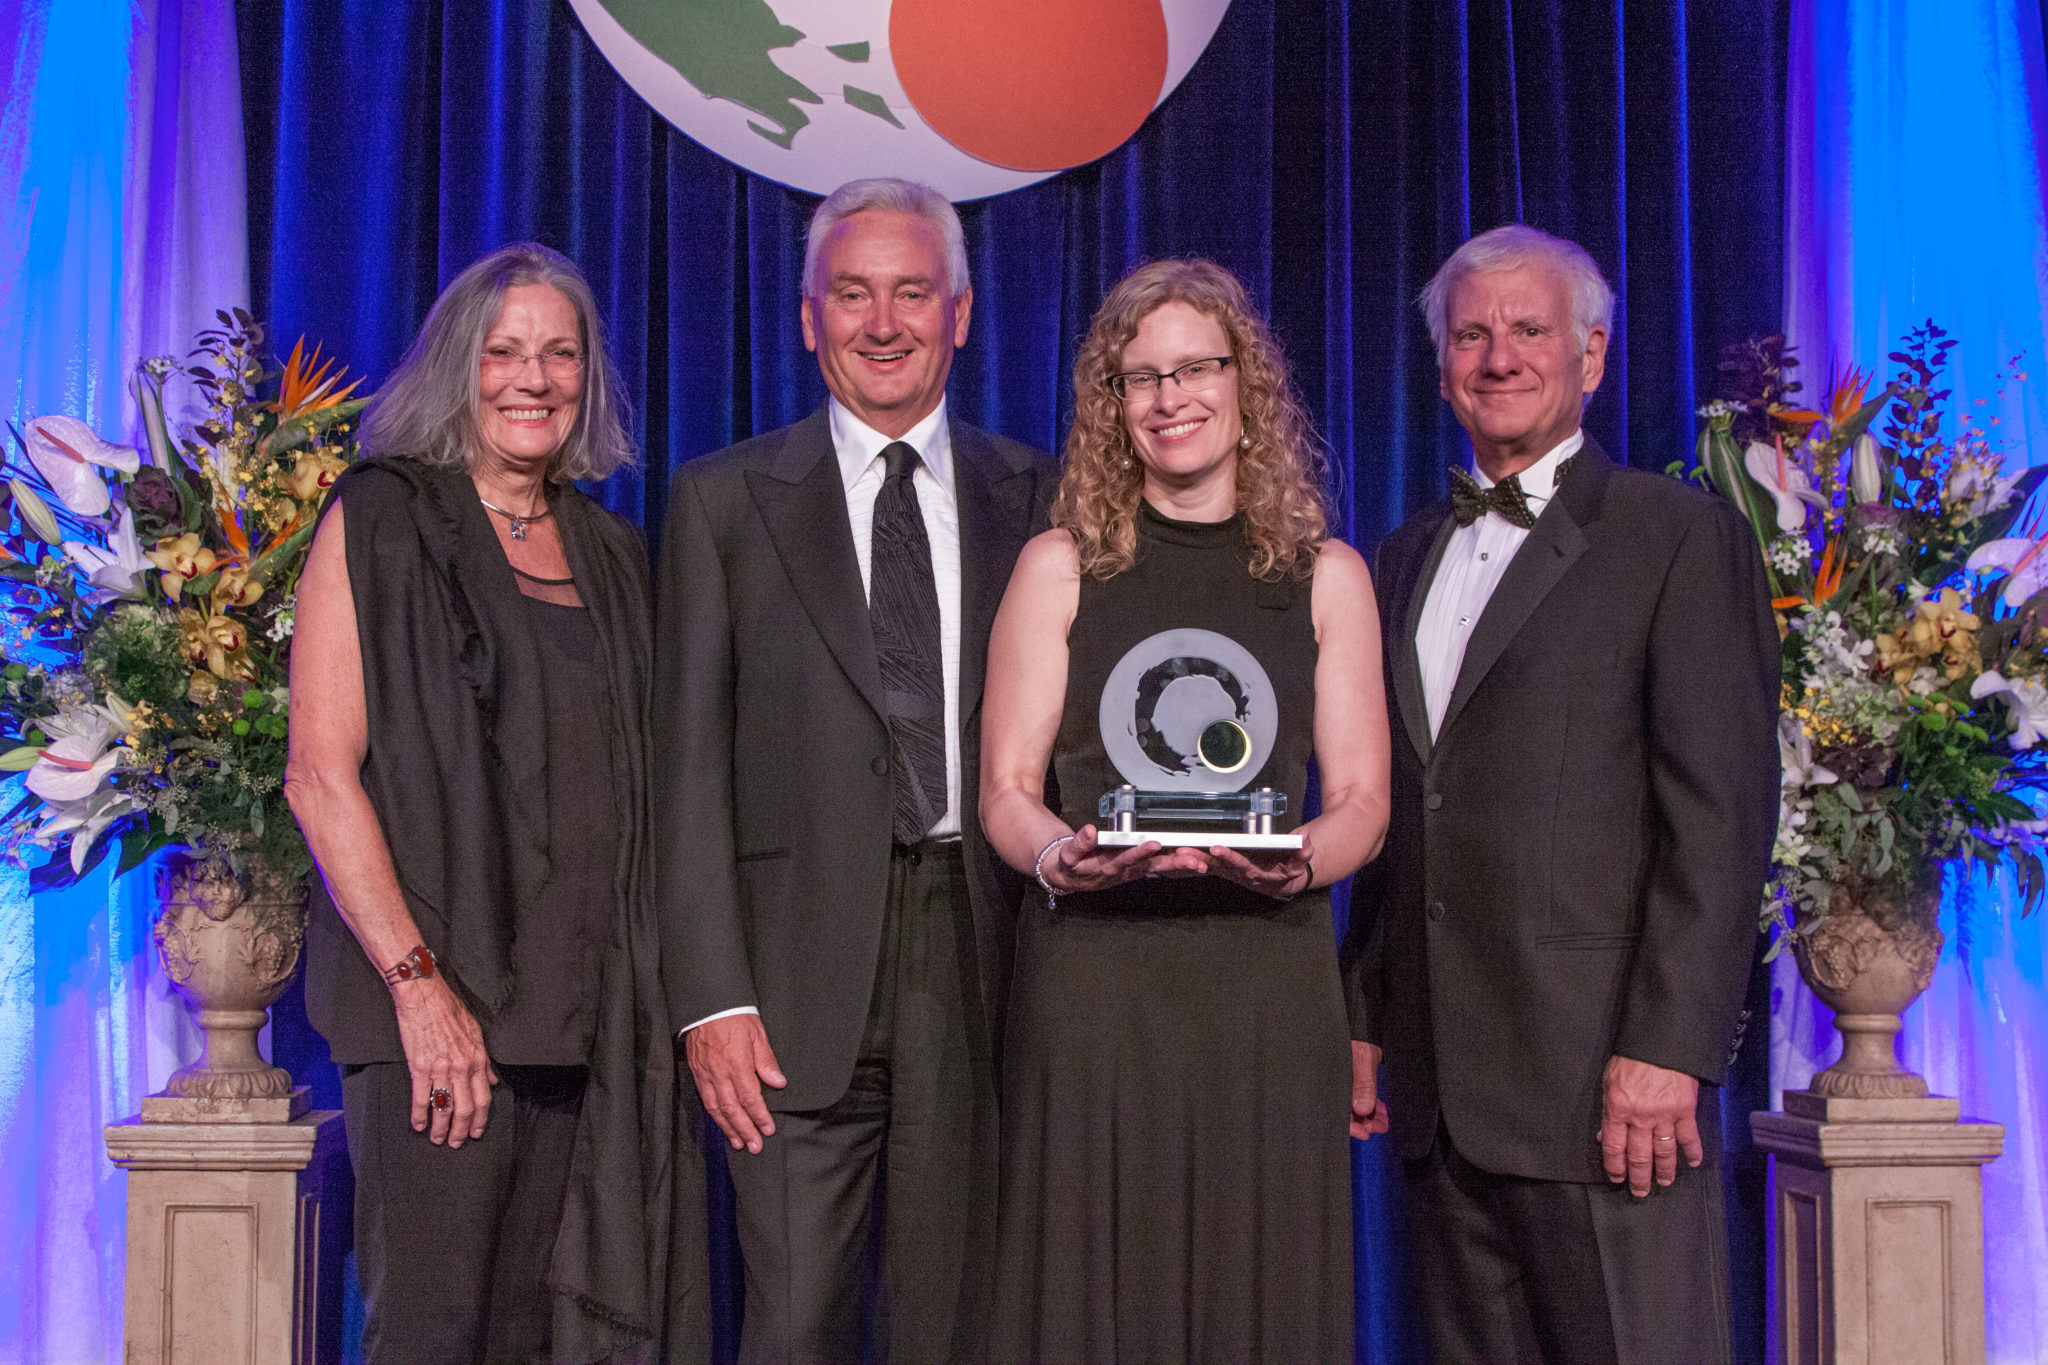 2015 Dr. Rogers Prize winner, Dr. Heather Boon with jury members. From left, Dr. Mary Ann Richardson, Dr. Simon Sutcliffe, Dr. Heather Boon, Dr. Joseph Pizzorno